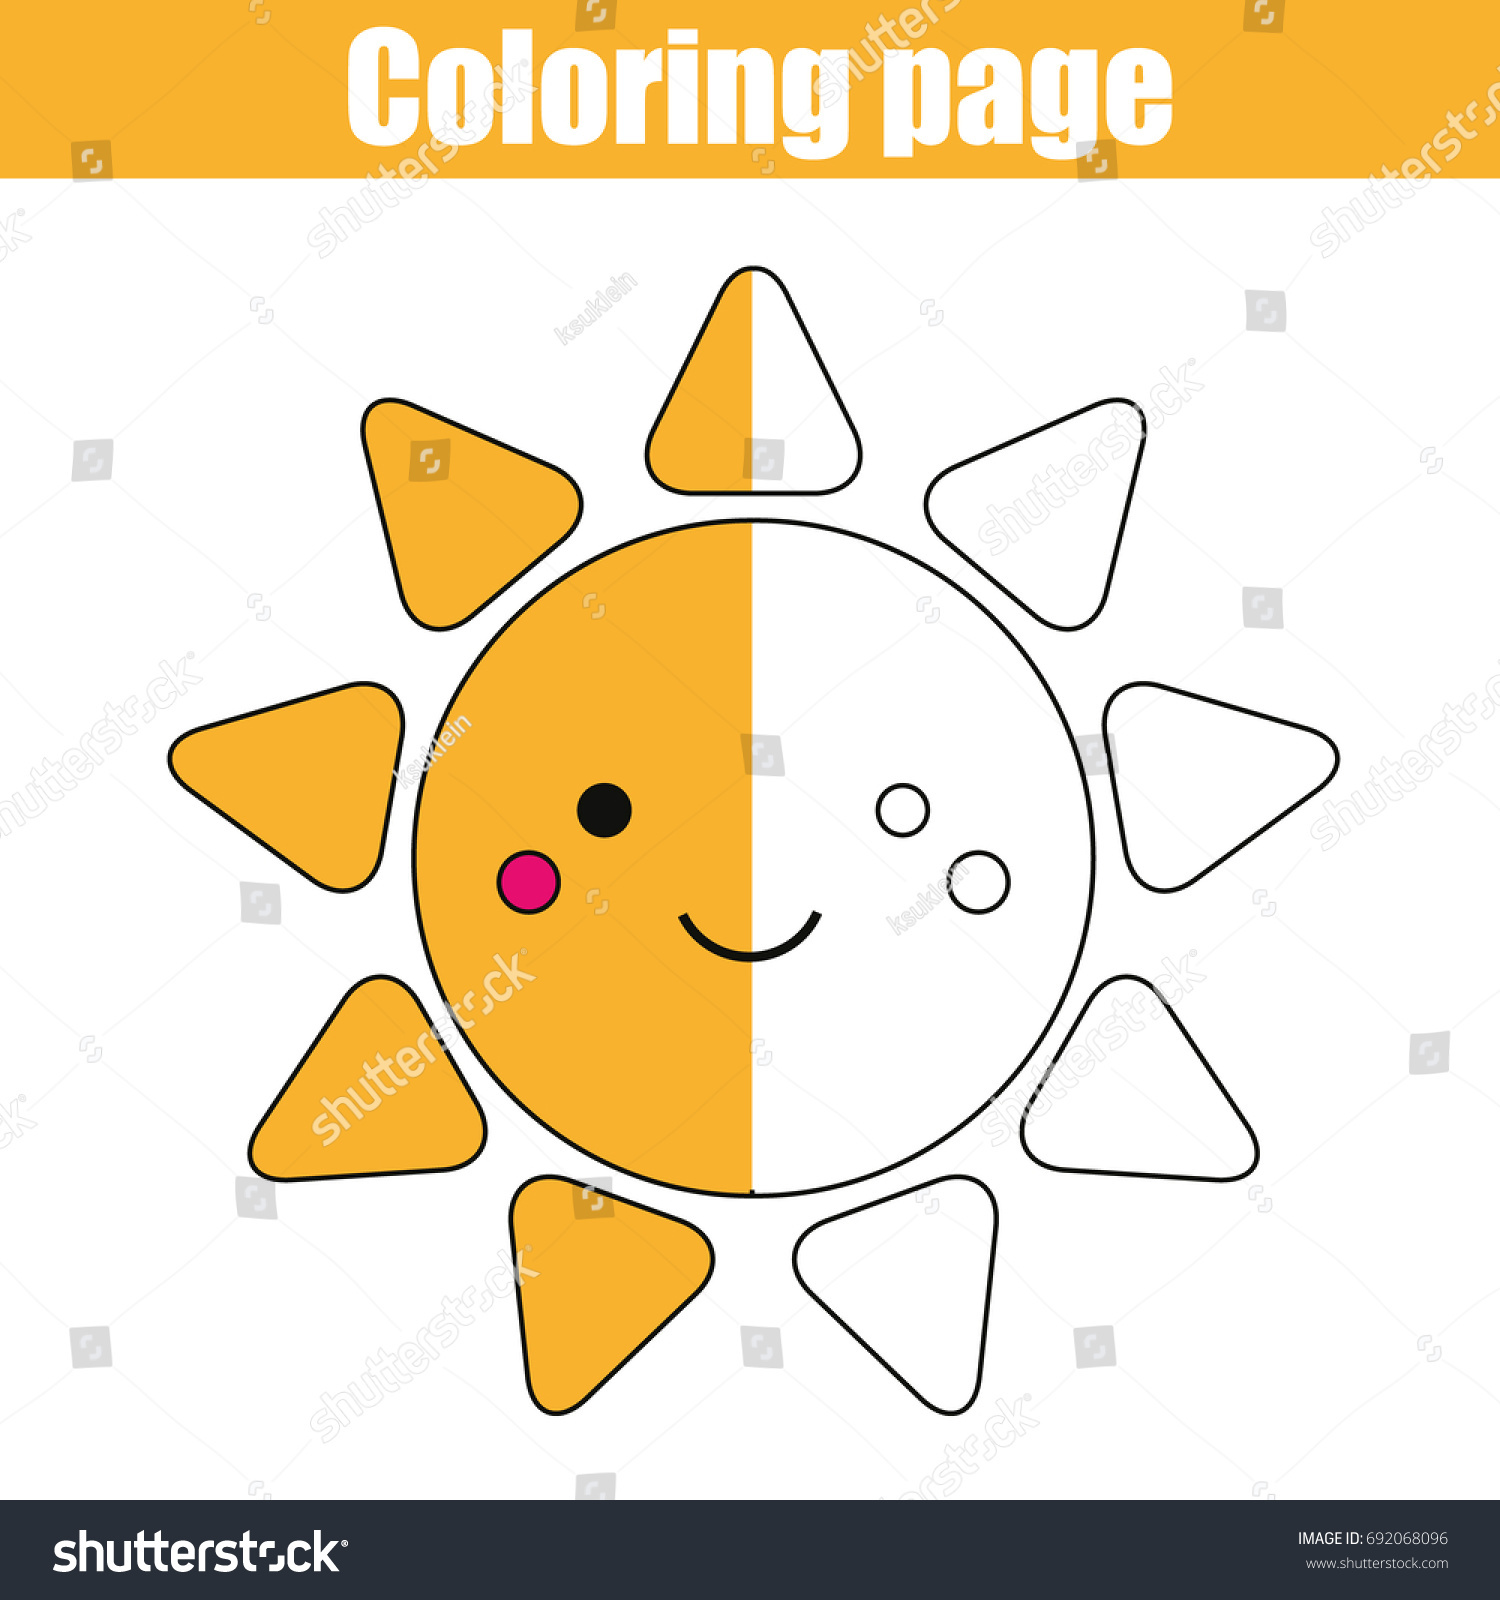 Coloring page with cute smiling sun character Color the picture drawing activity Educational game